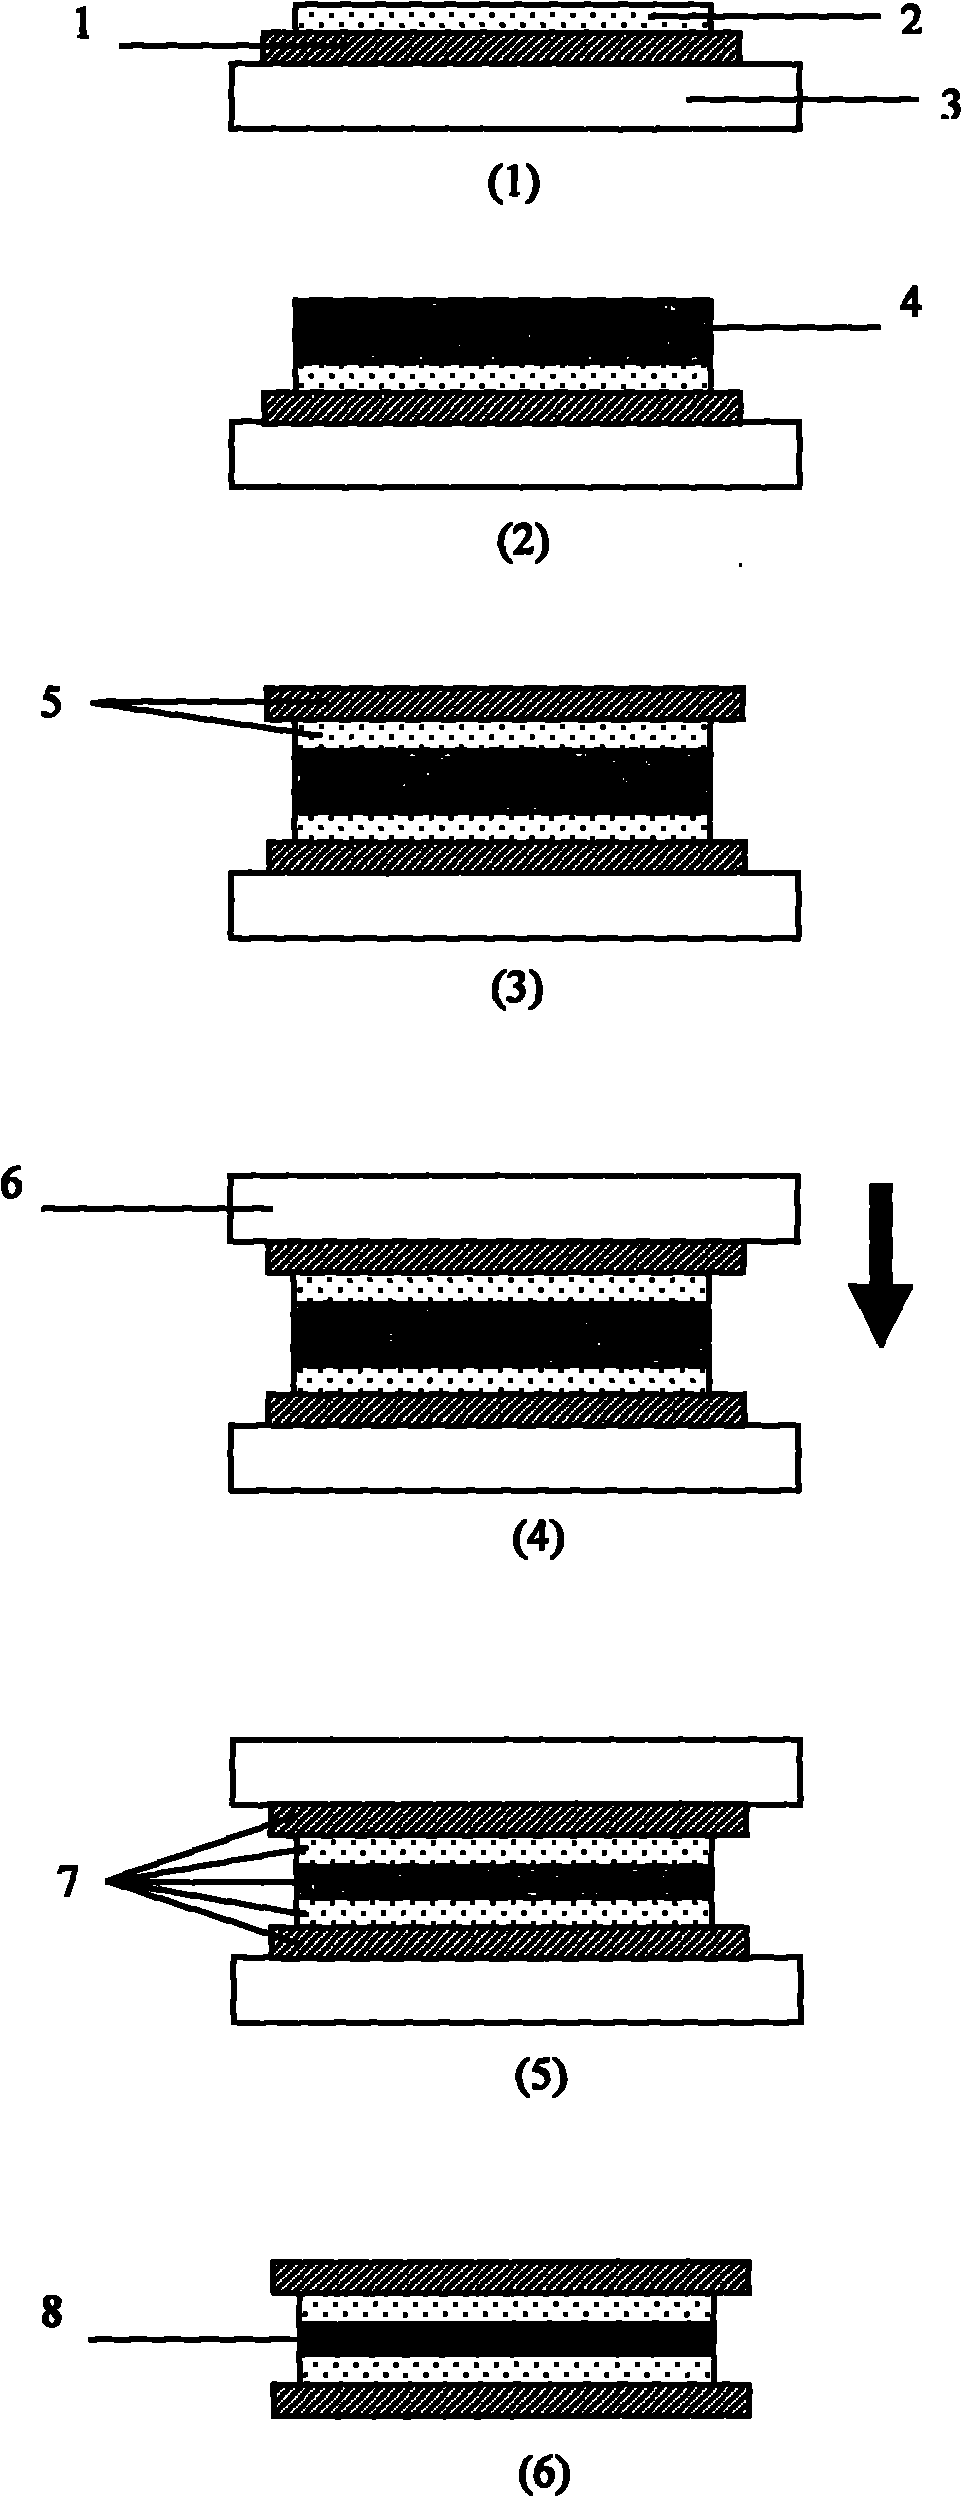 Extrusion-type interelectrode sulfuration forming and encapsulating method for researching flexible sensor sensitive element